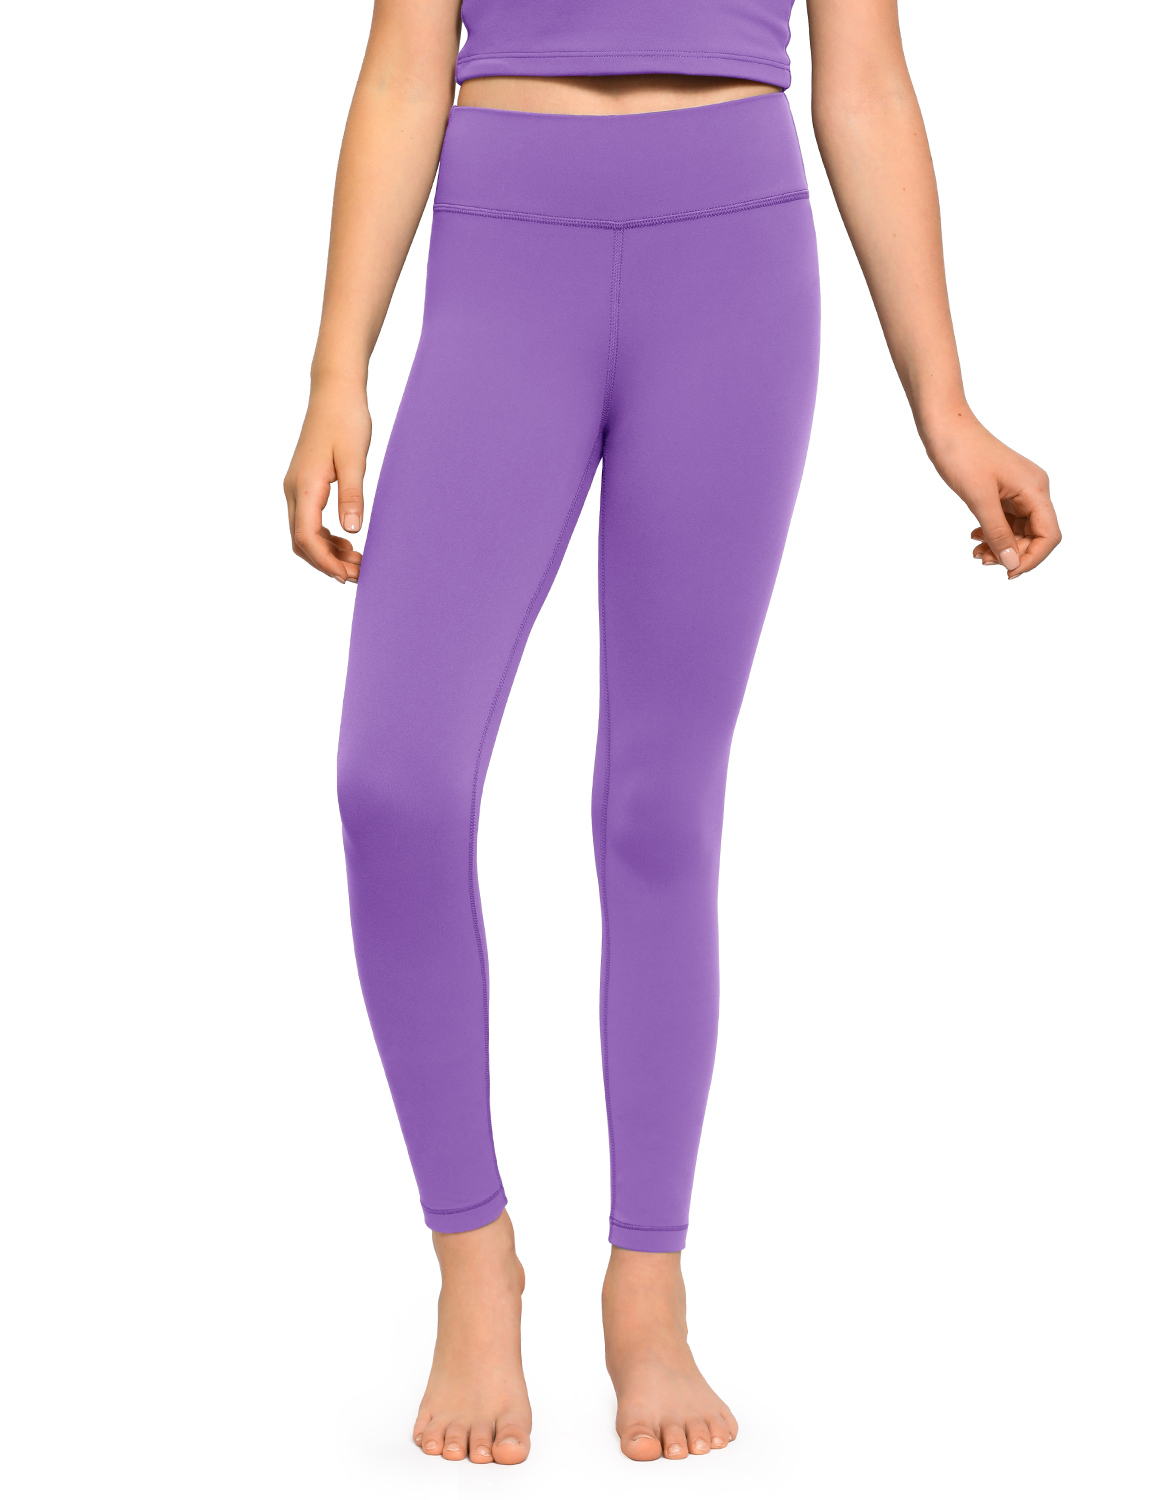 CRZ YOGA Butterluxe High Waisted Capris Workout Leggings for Women 21'' -  Lounge Leggings Buttery Soft Yoga Pants Magenta Purple Large : Buy Online  at Best Price in KSA - Souq is